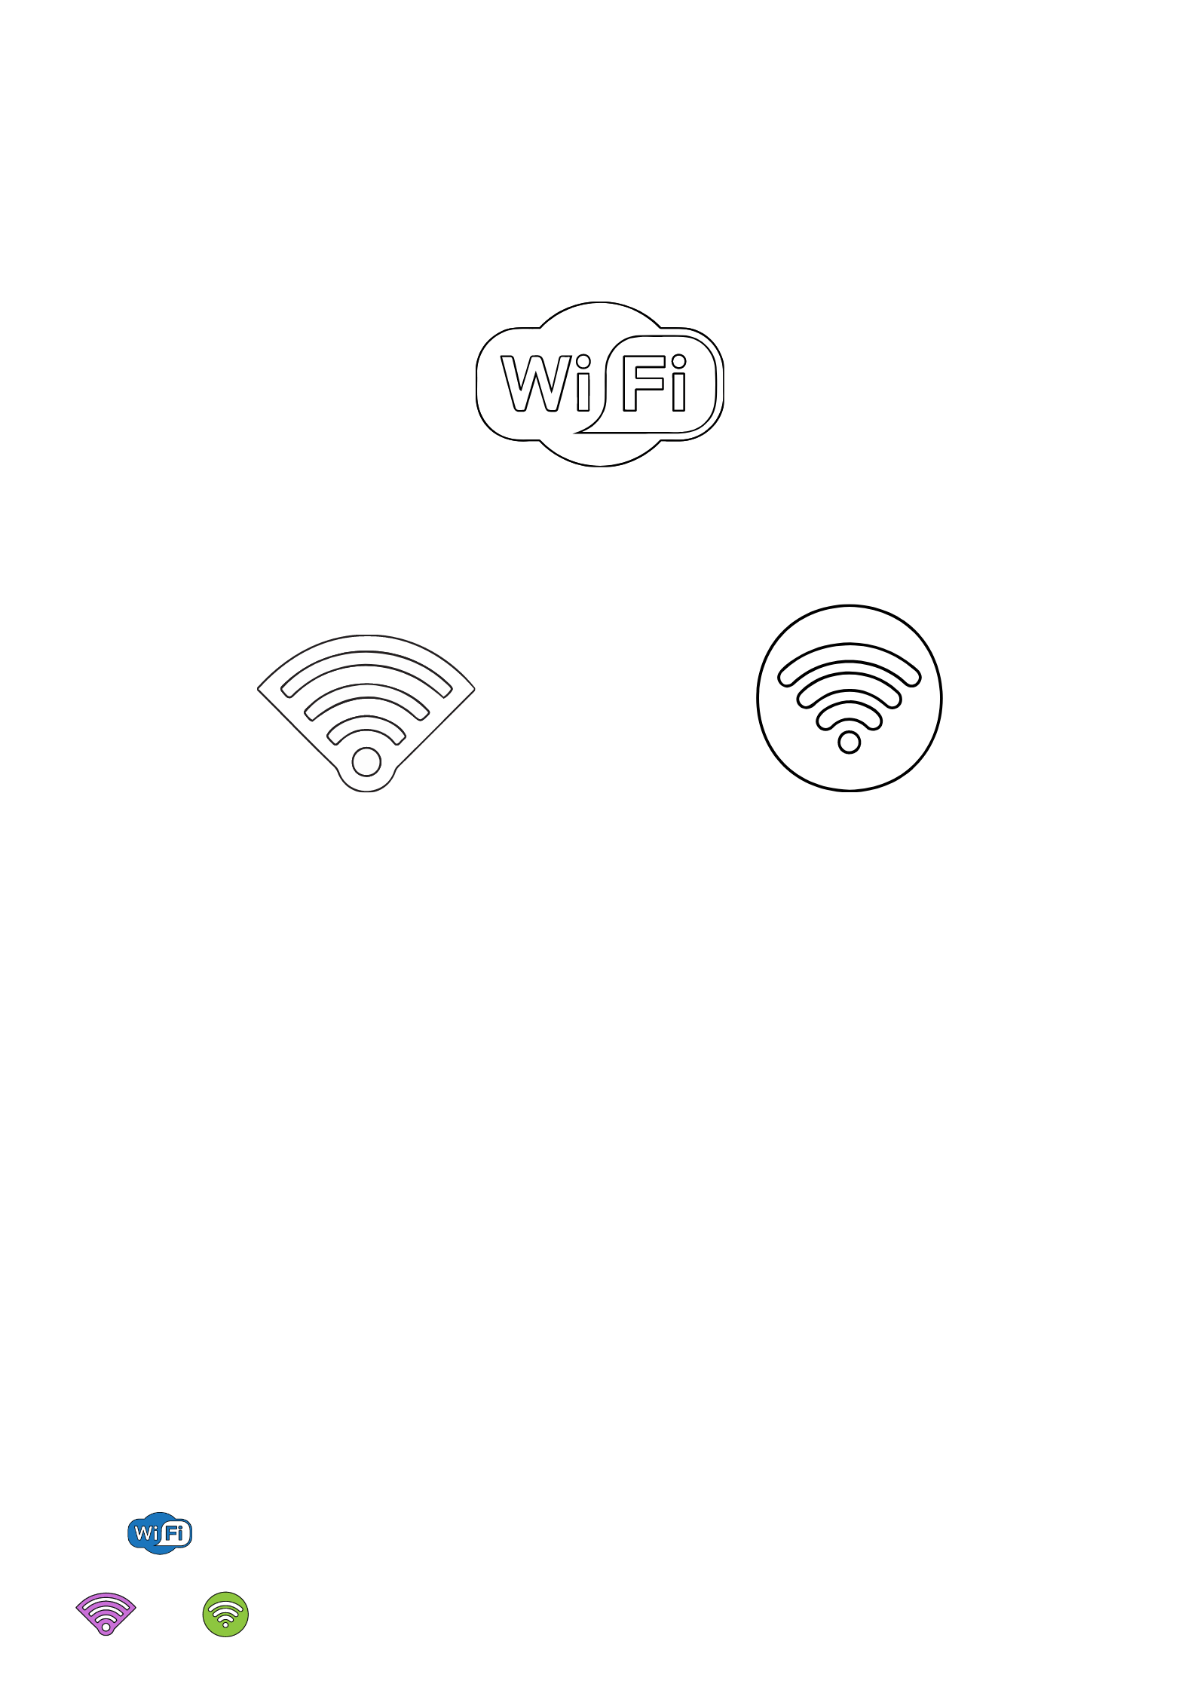 Small Wifi Symbol coloring page Template